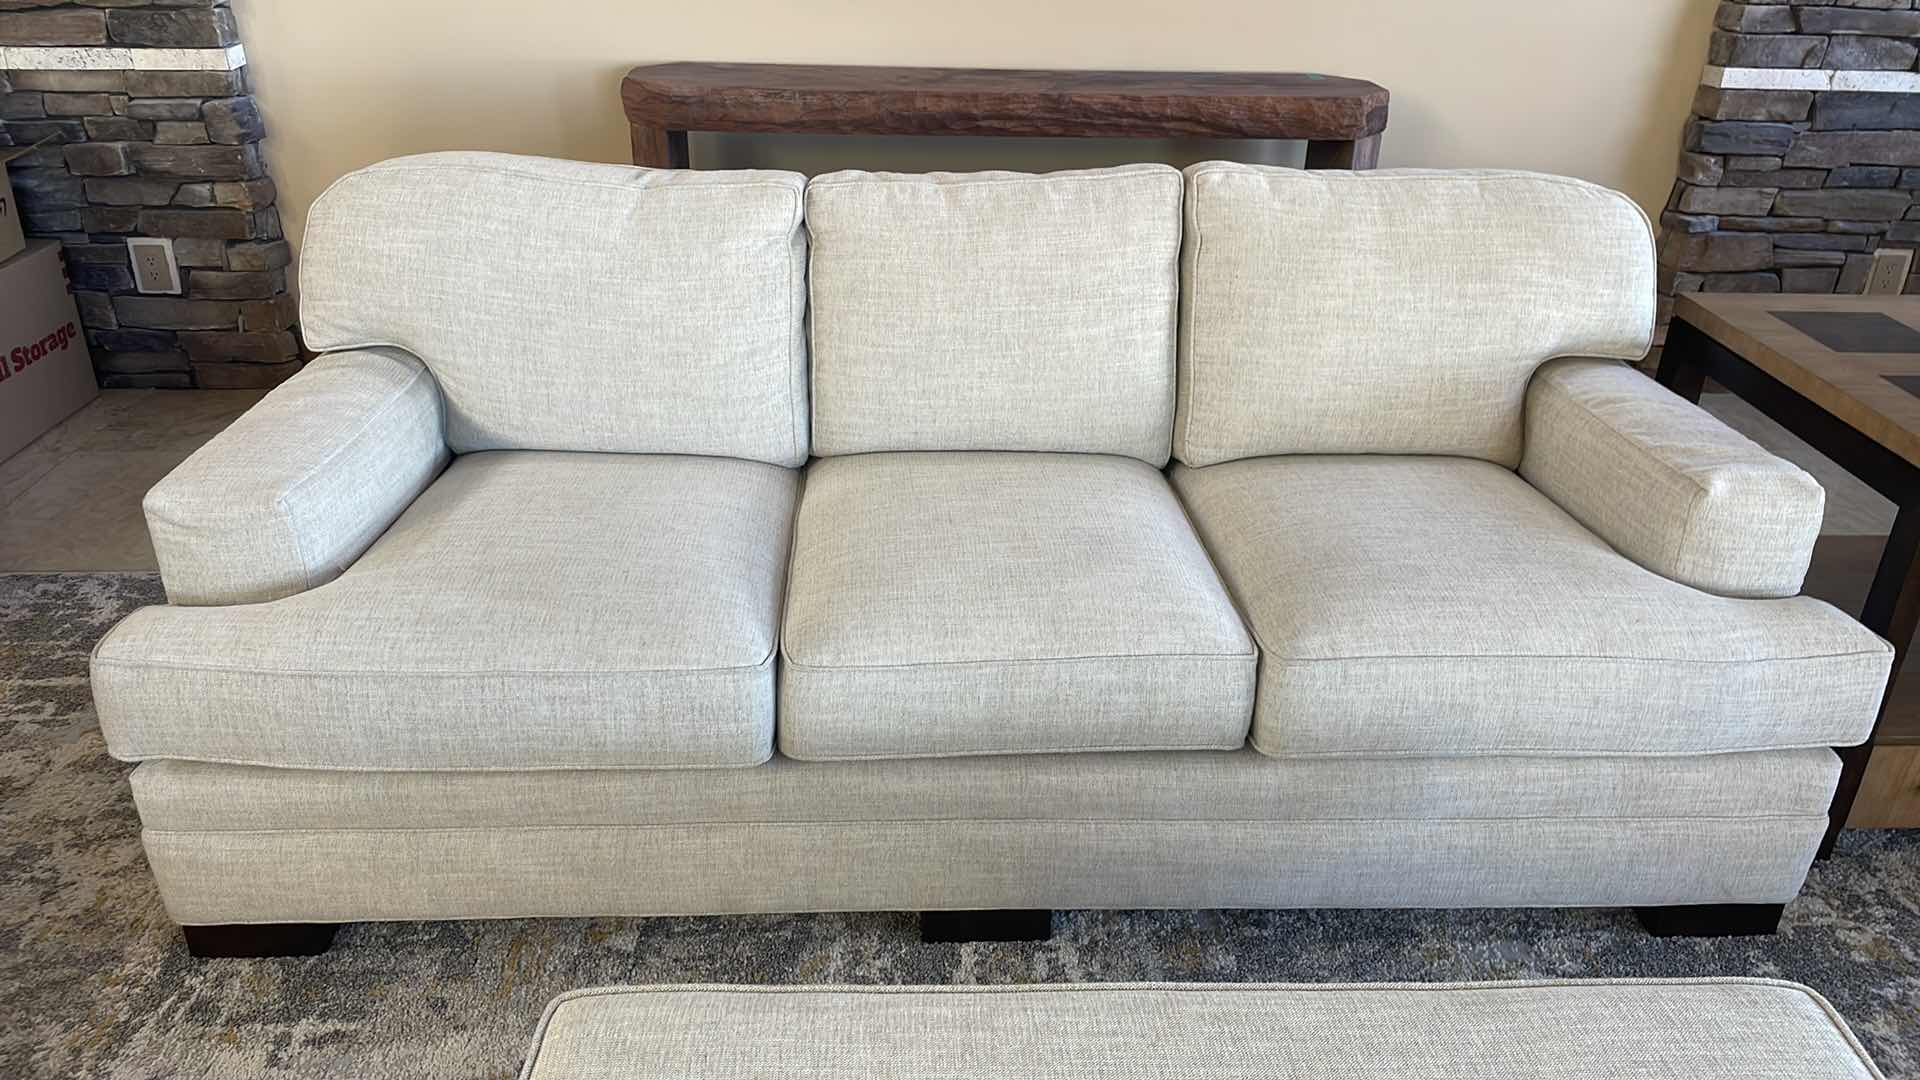 Photo 1 of TAYLOR MADE SOFA BY TAYLOR KING ATTACHED BACK CUSHIONS LAMSON LINEN FINISH FABRIC 87” X 40”